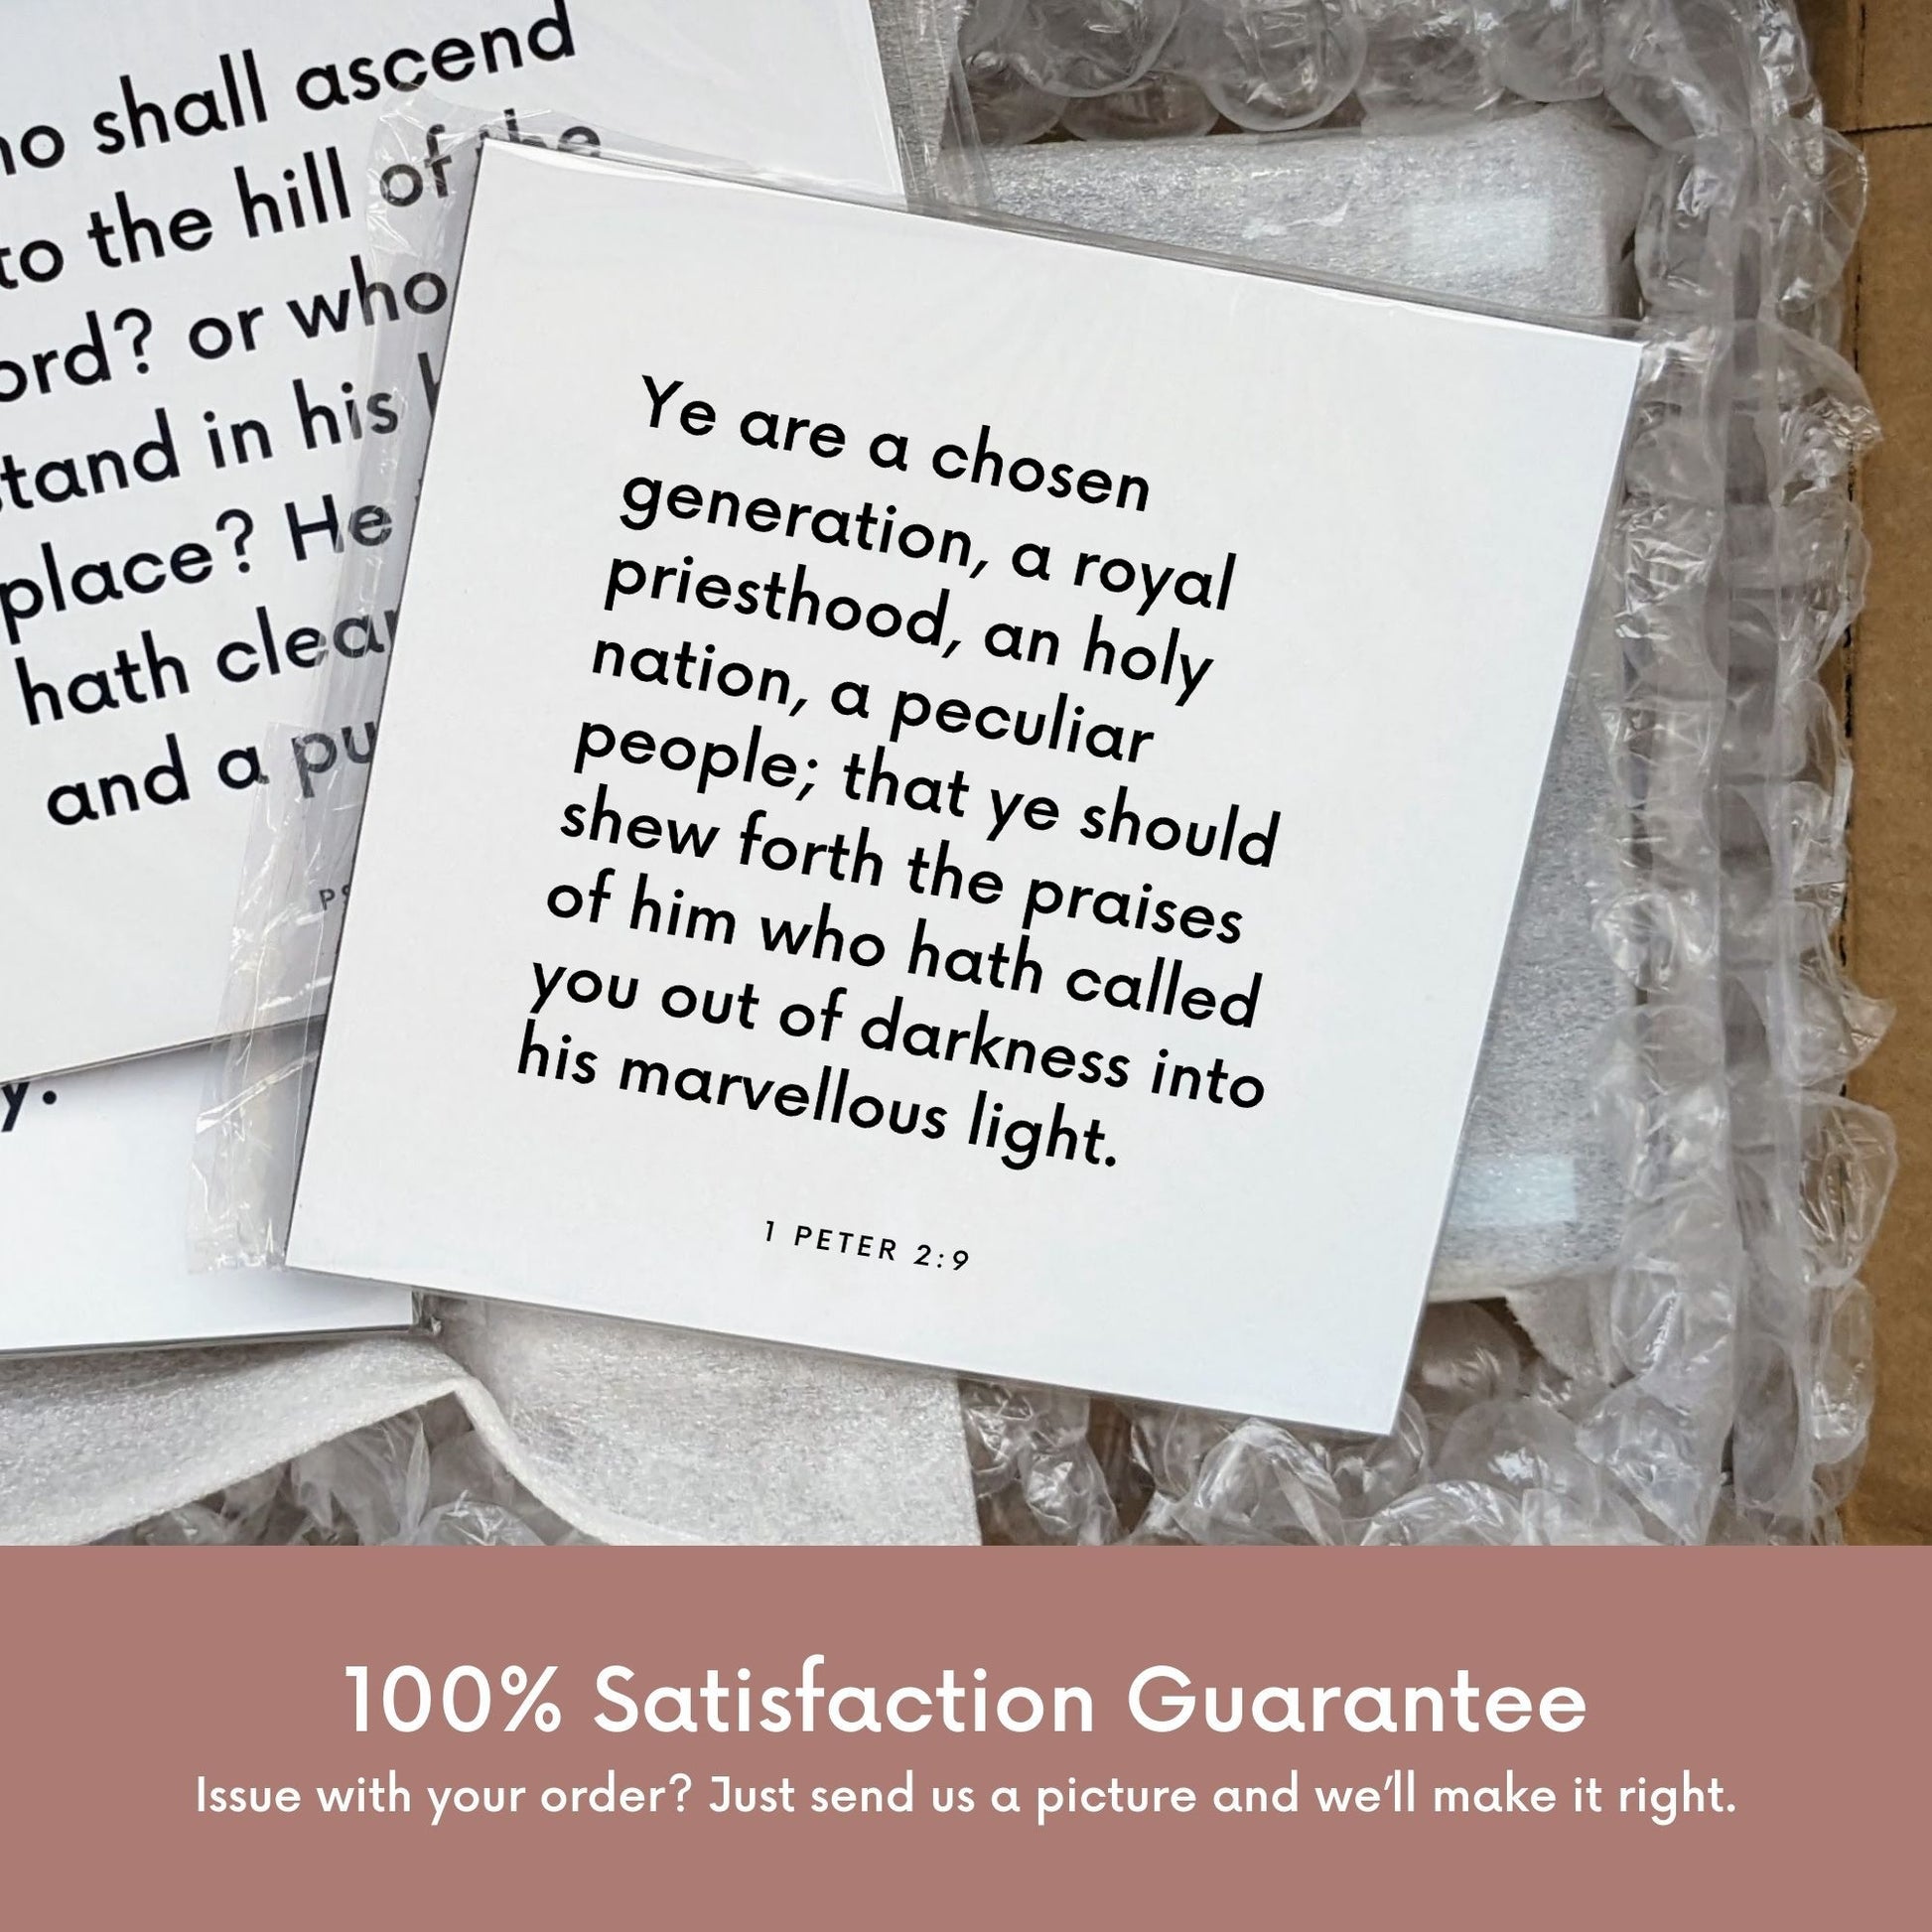 Shipping materials for scripture tile of 1 Peter 2:9 - "Ye are a chosen generation, a royal priesthood"